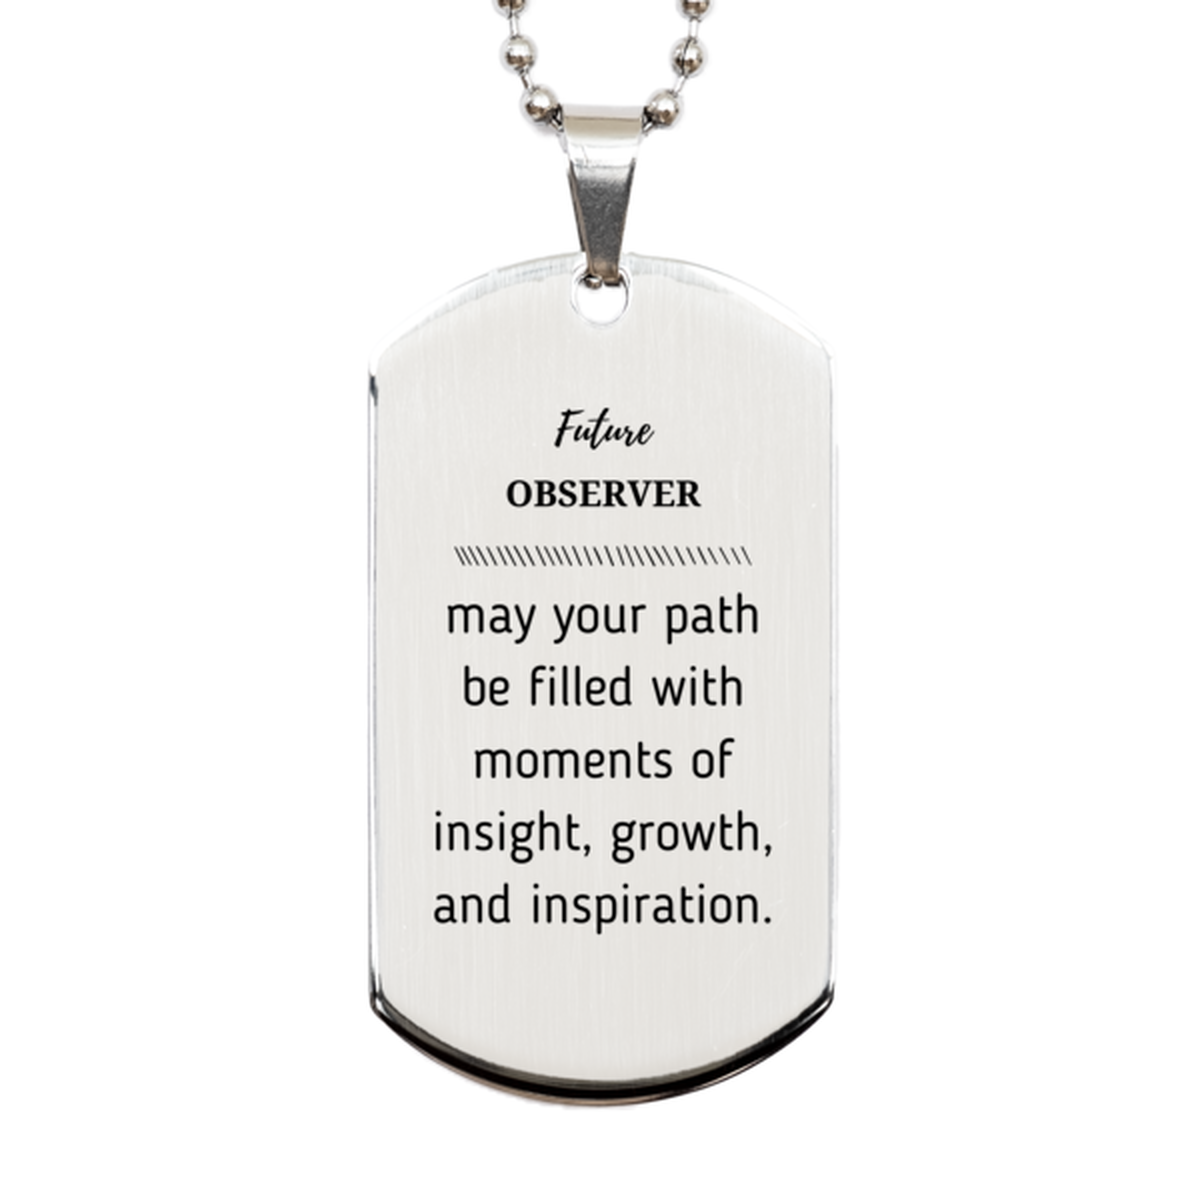 Future Observer Gifts, May your path be filled with moments of insight, Graduation Gifts for New Observer, Christmas Unique Silver Dog Tag For Men, Women, Friends